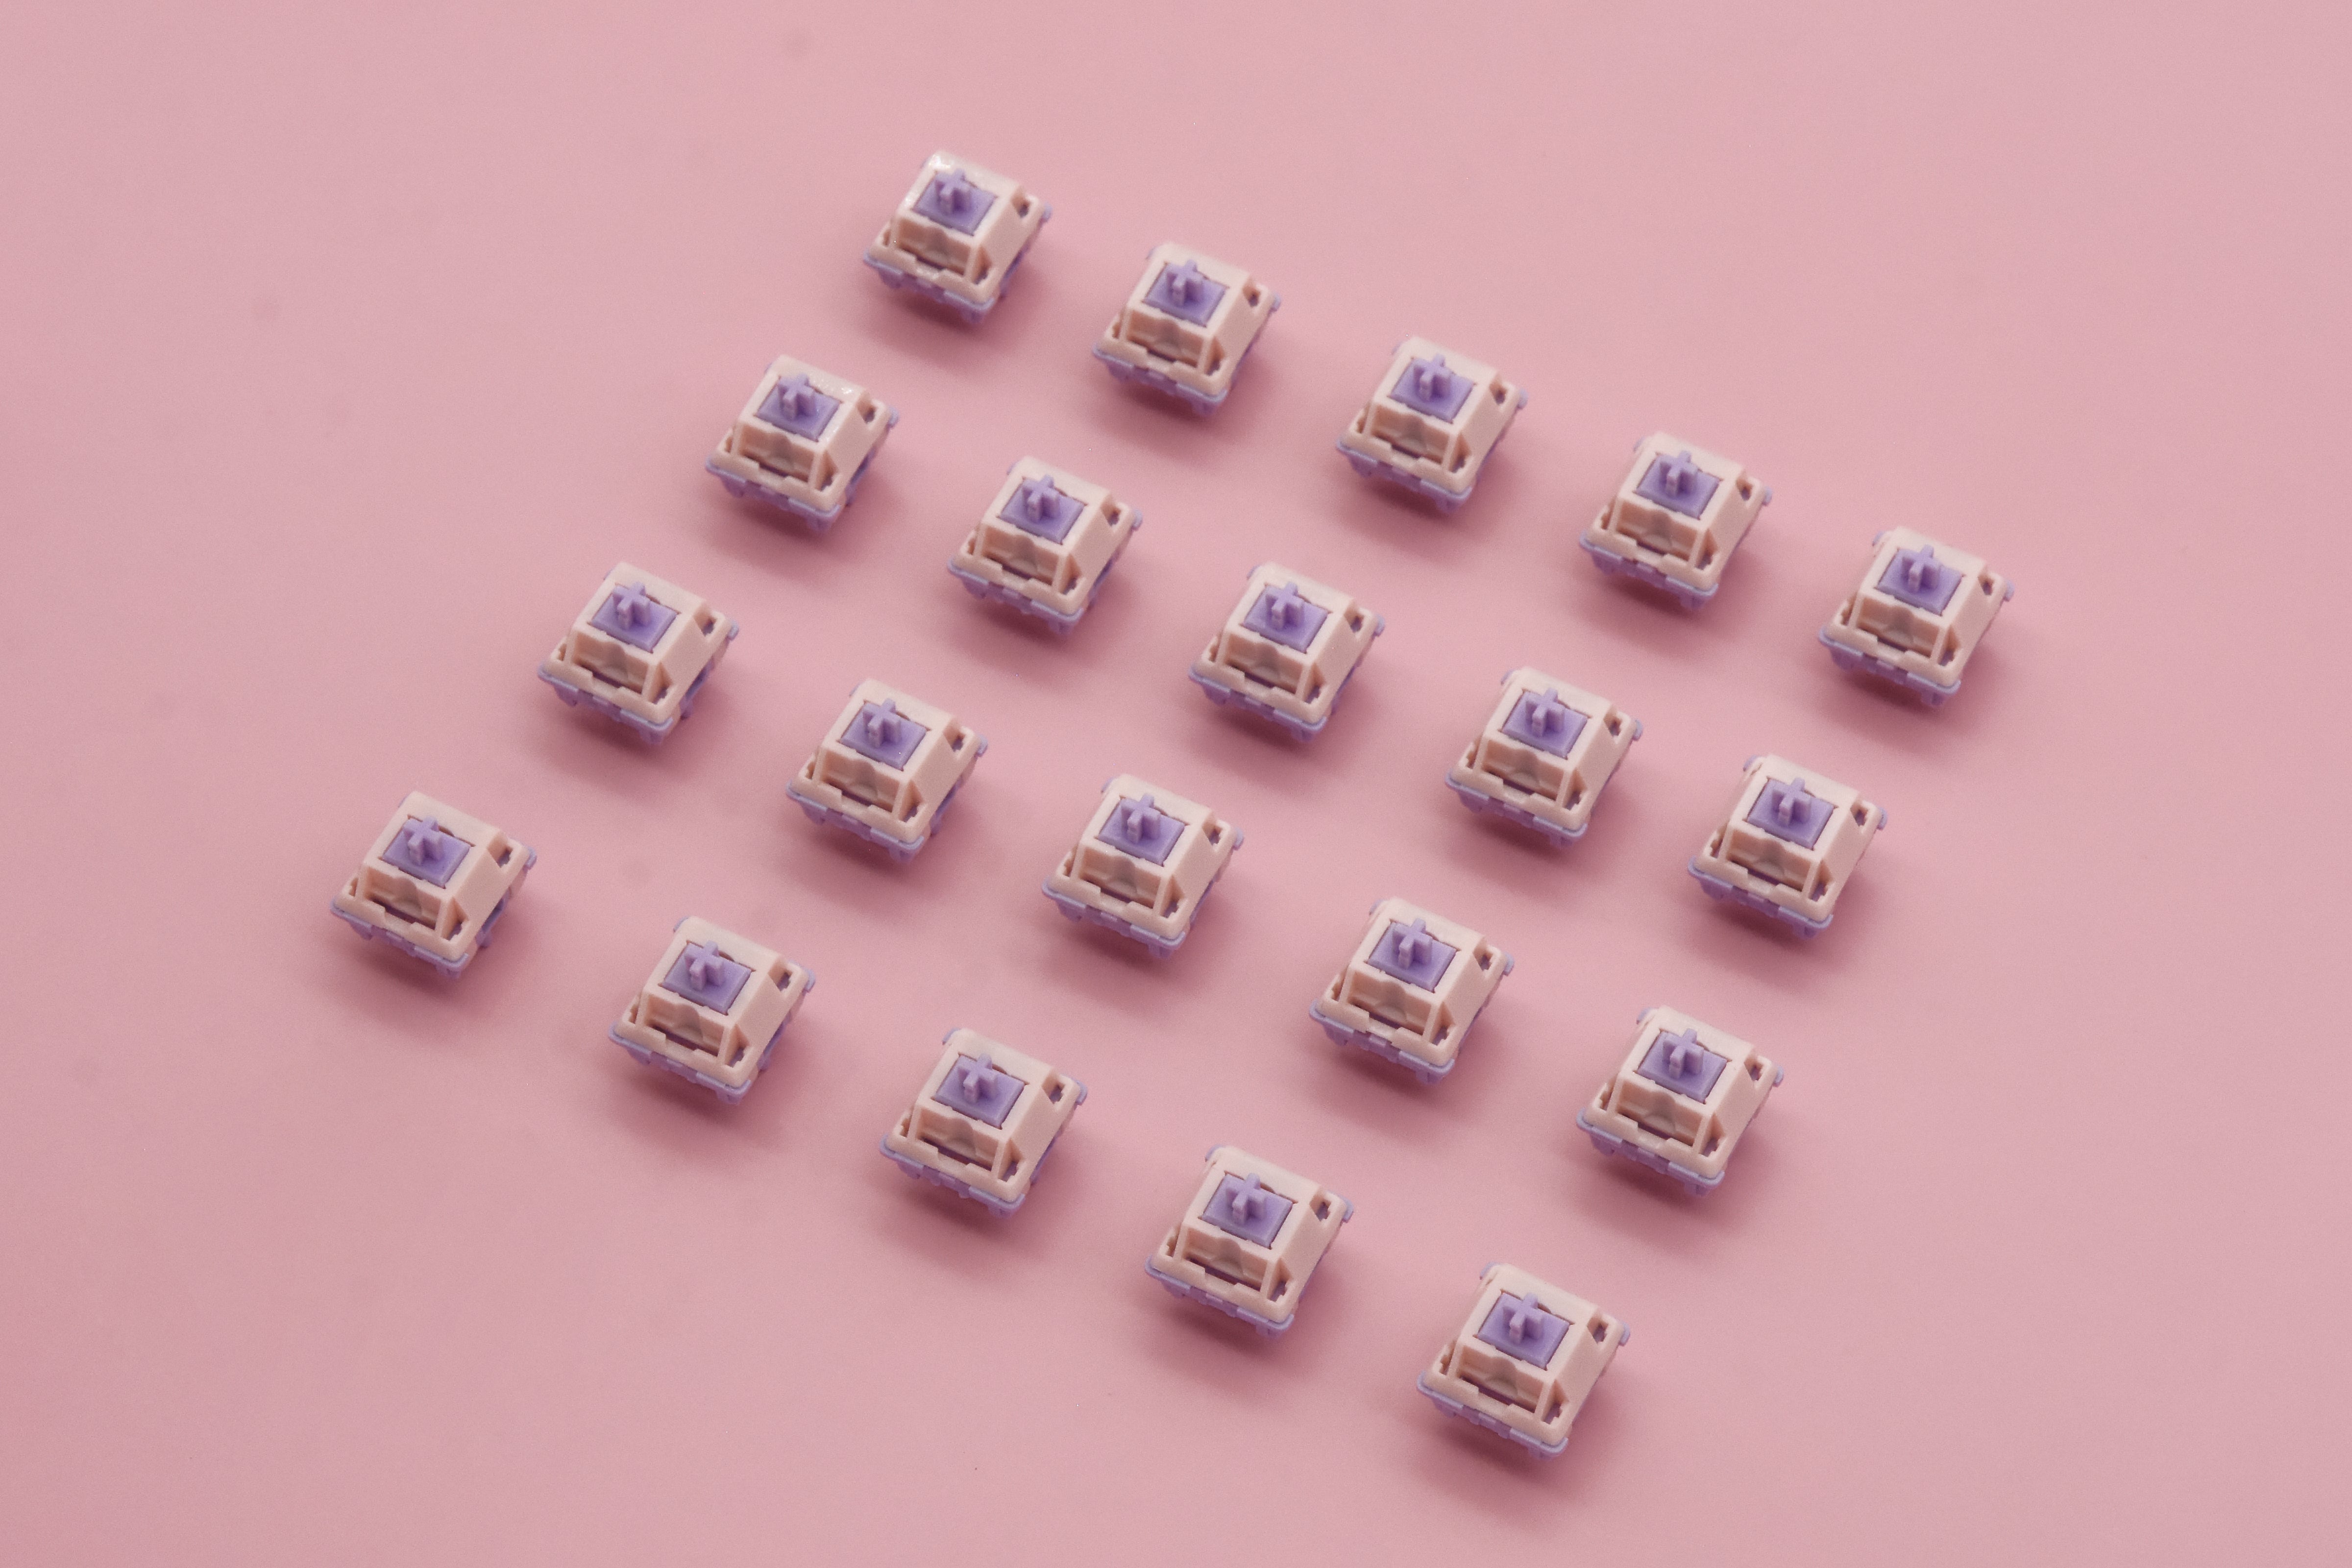 MMD PRINCESS LINEAR SWITCH FACTORY LUBED EDITION (10PCS)